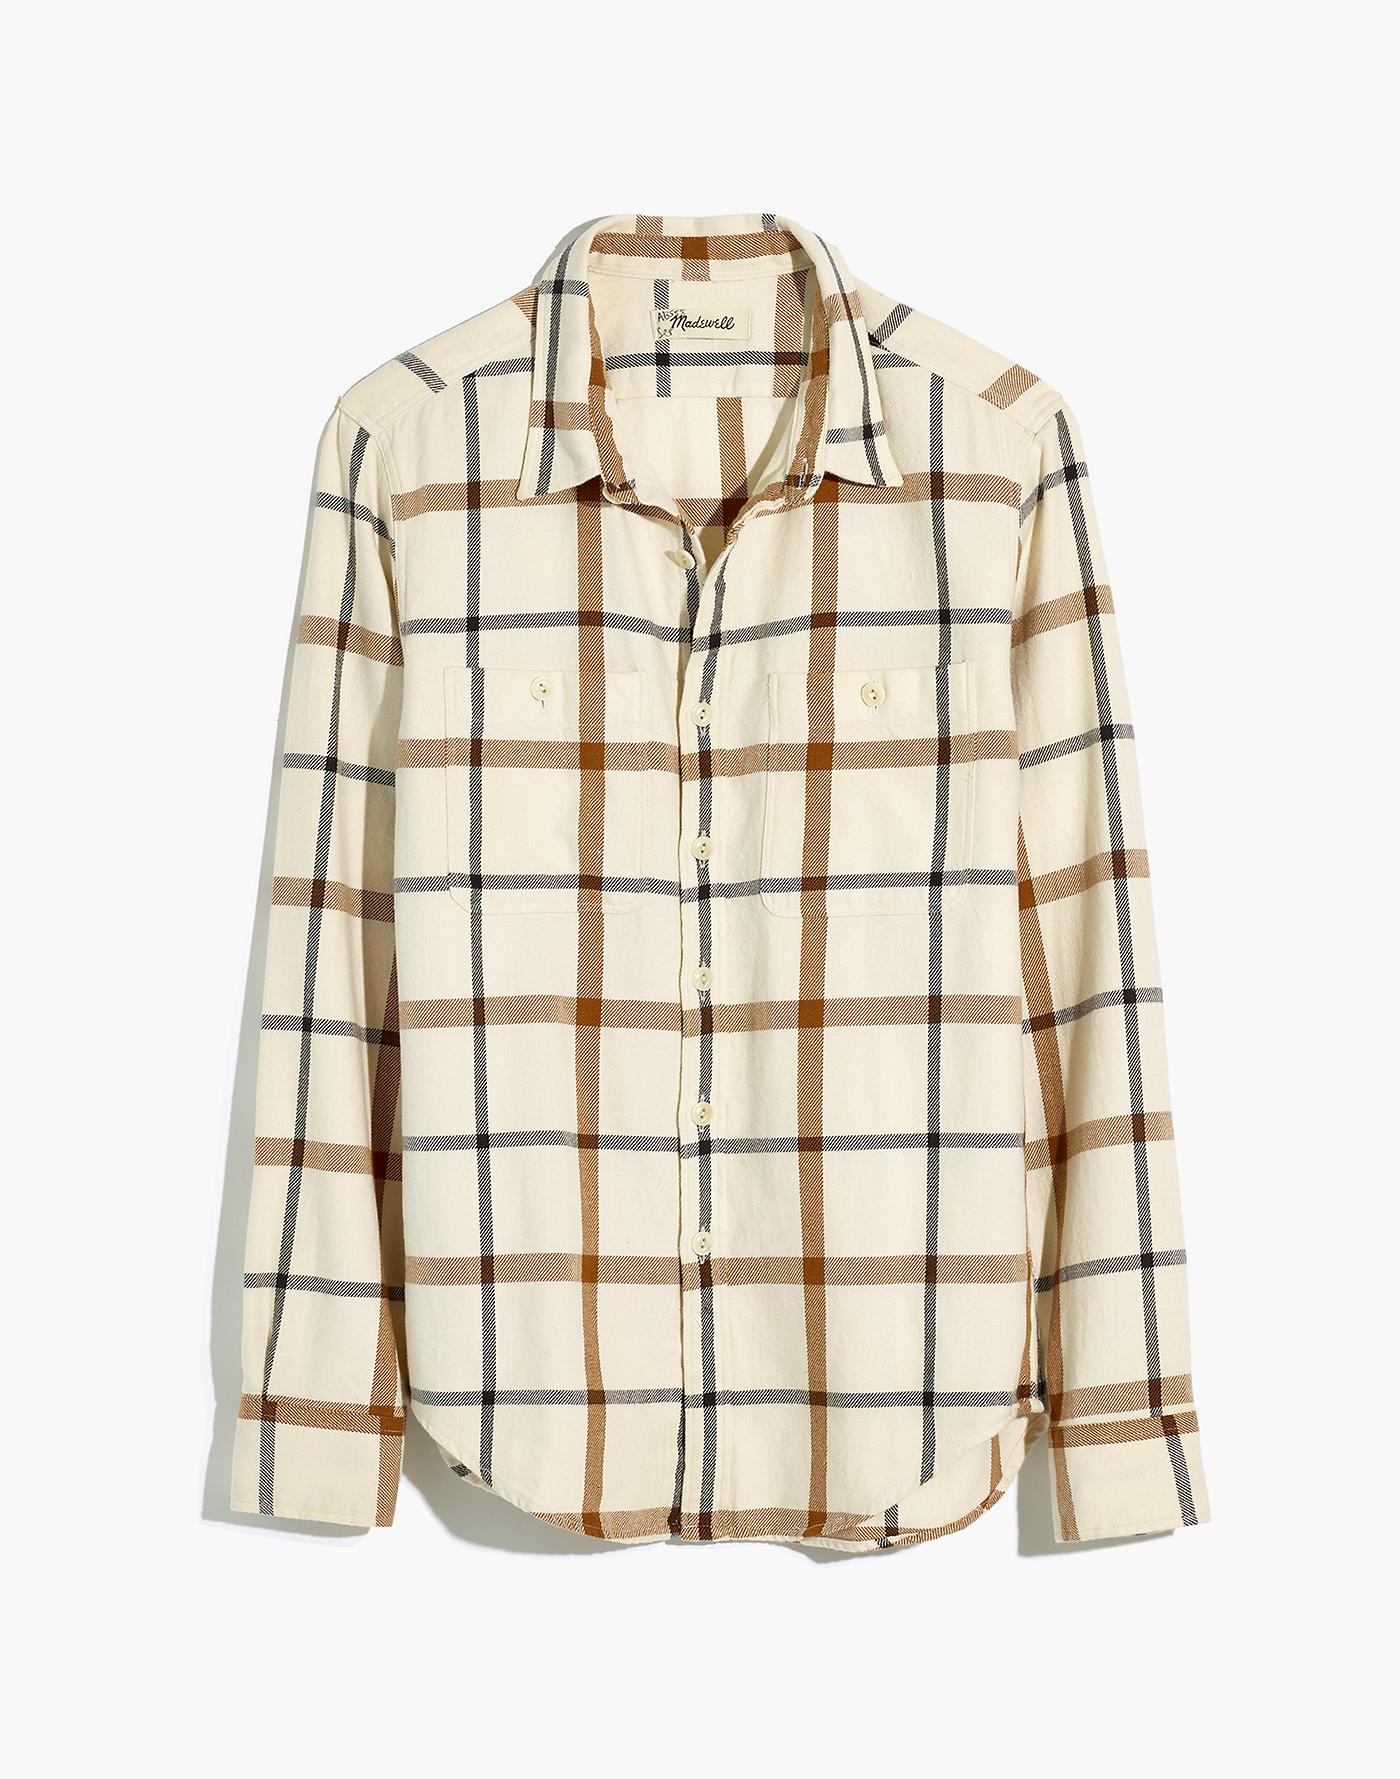 Madewell Flannel Shirt In Windowpane Plaid for Men - Lyst